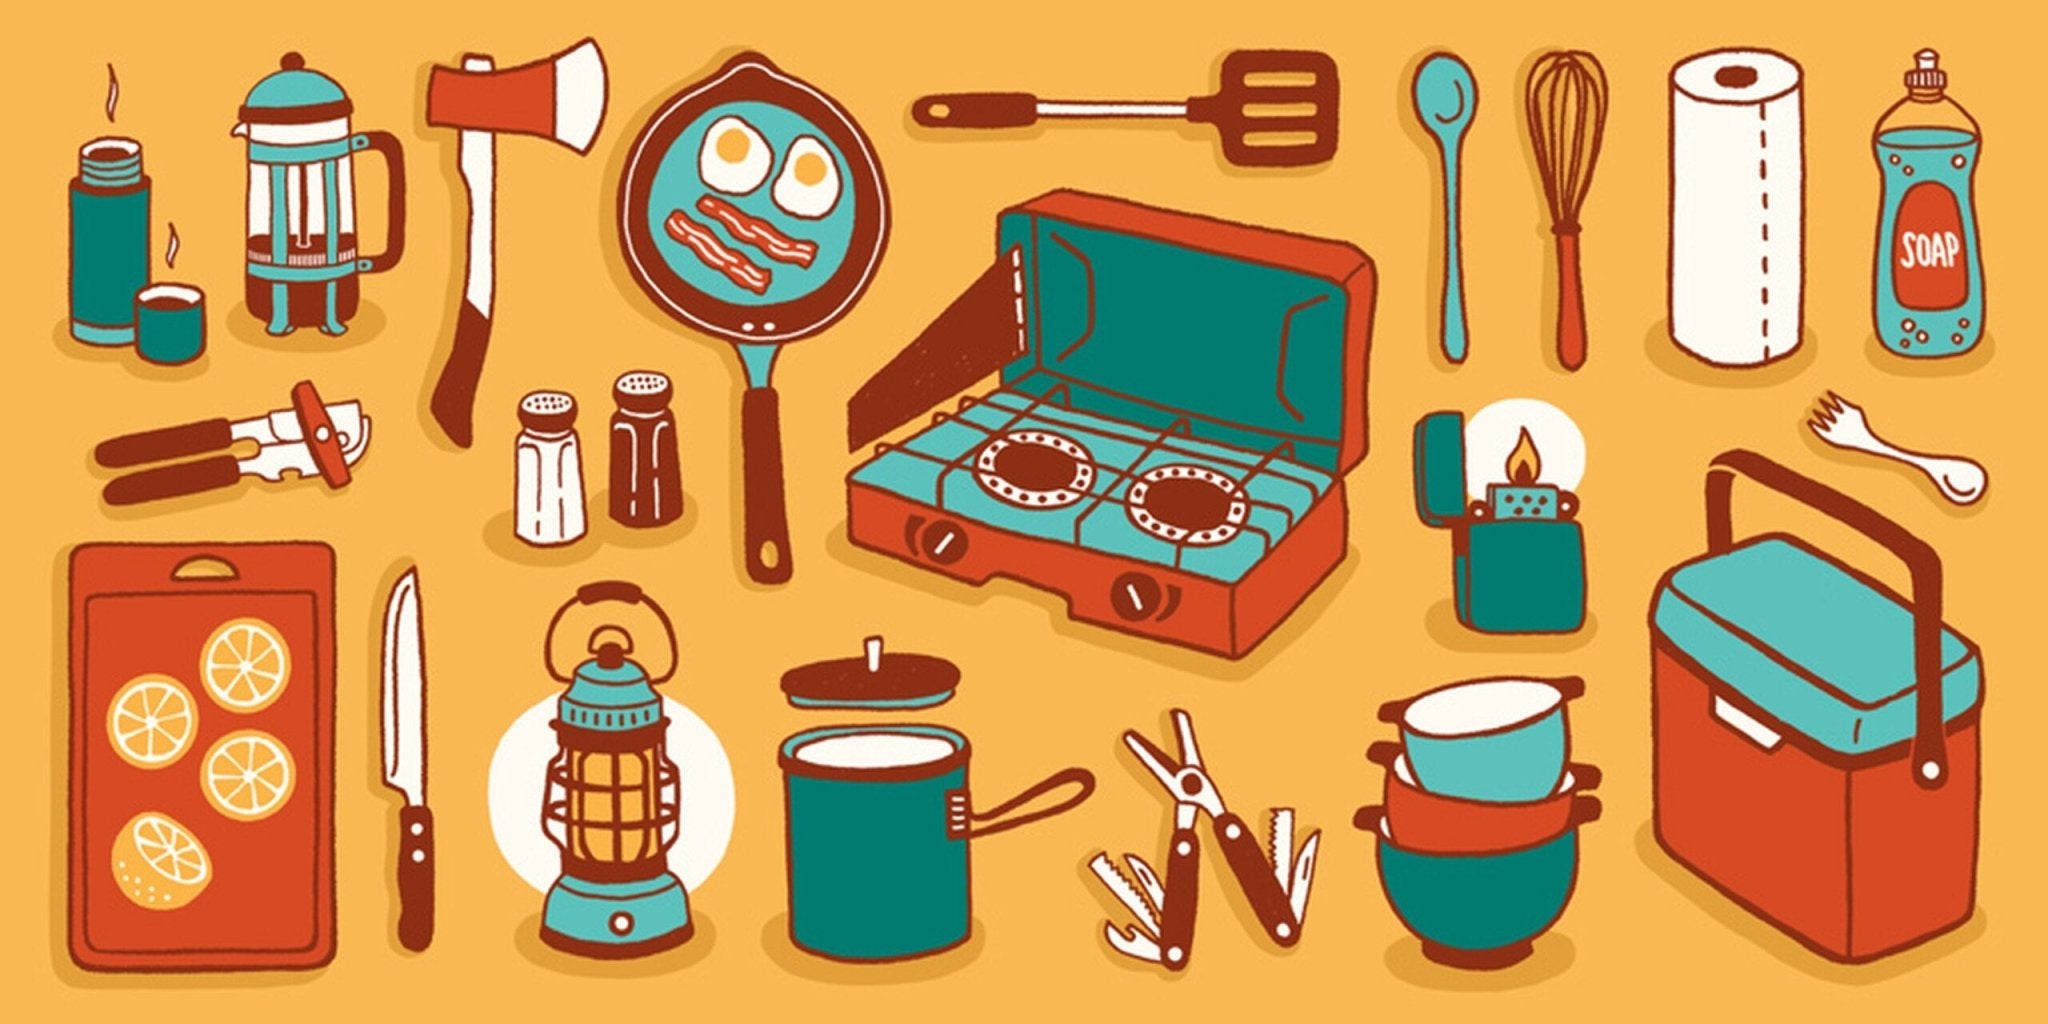 Kitchen Essentials For Camping | Chef Sac